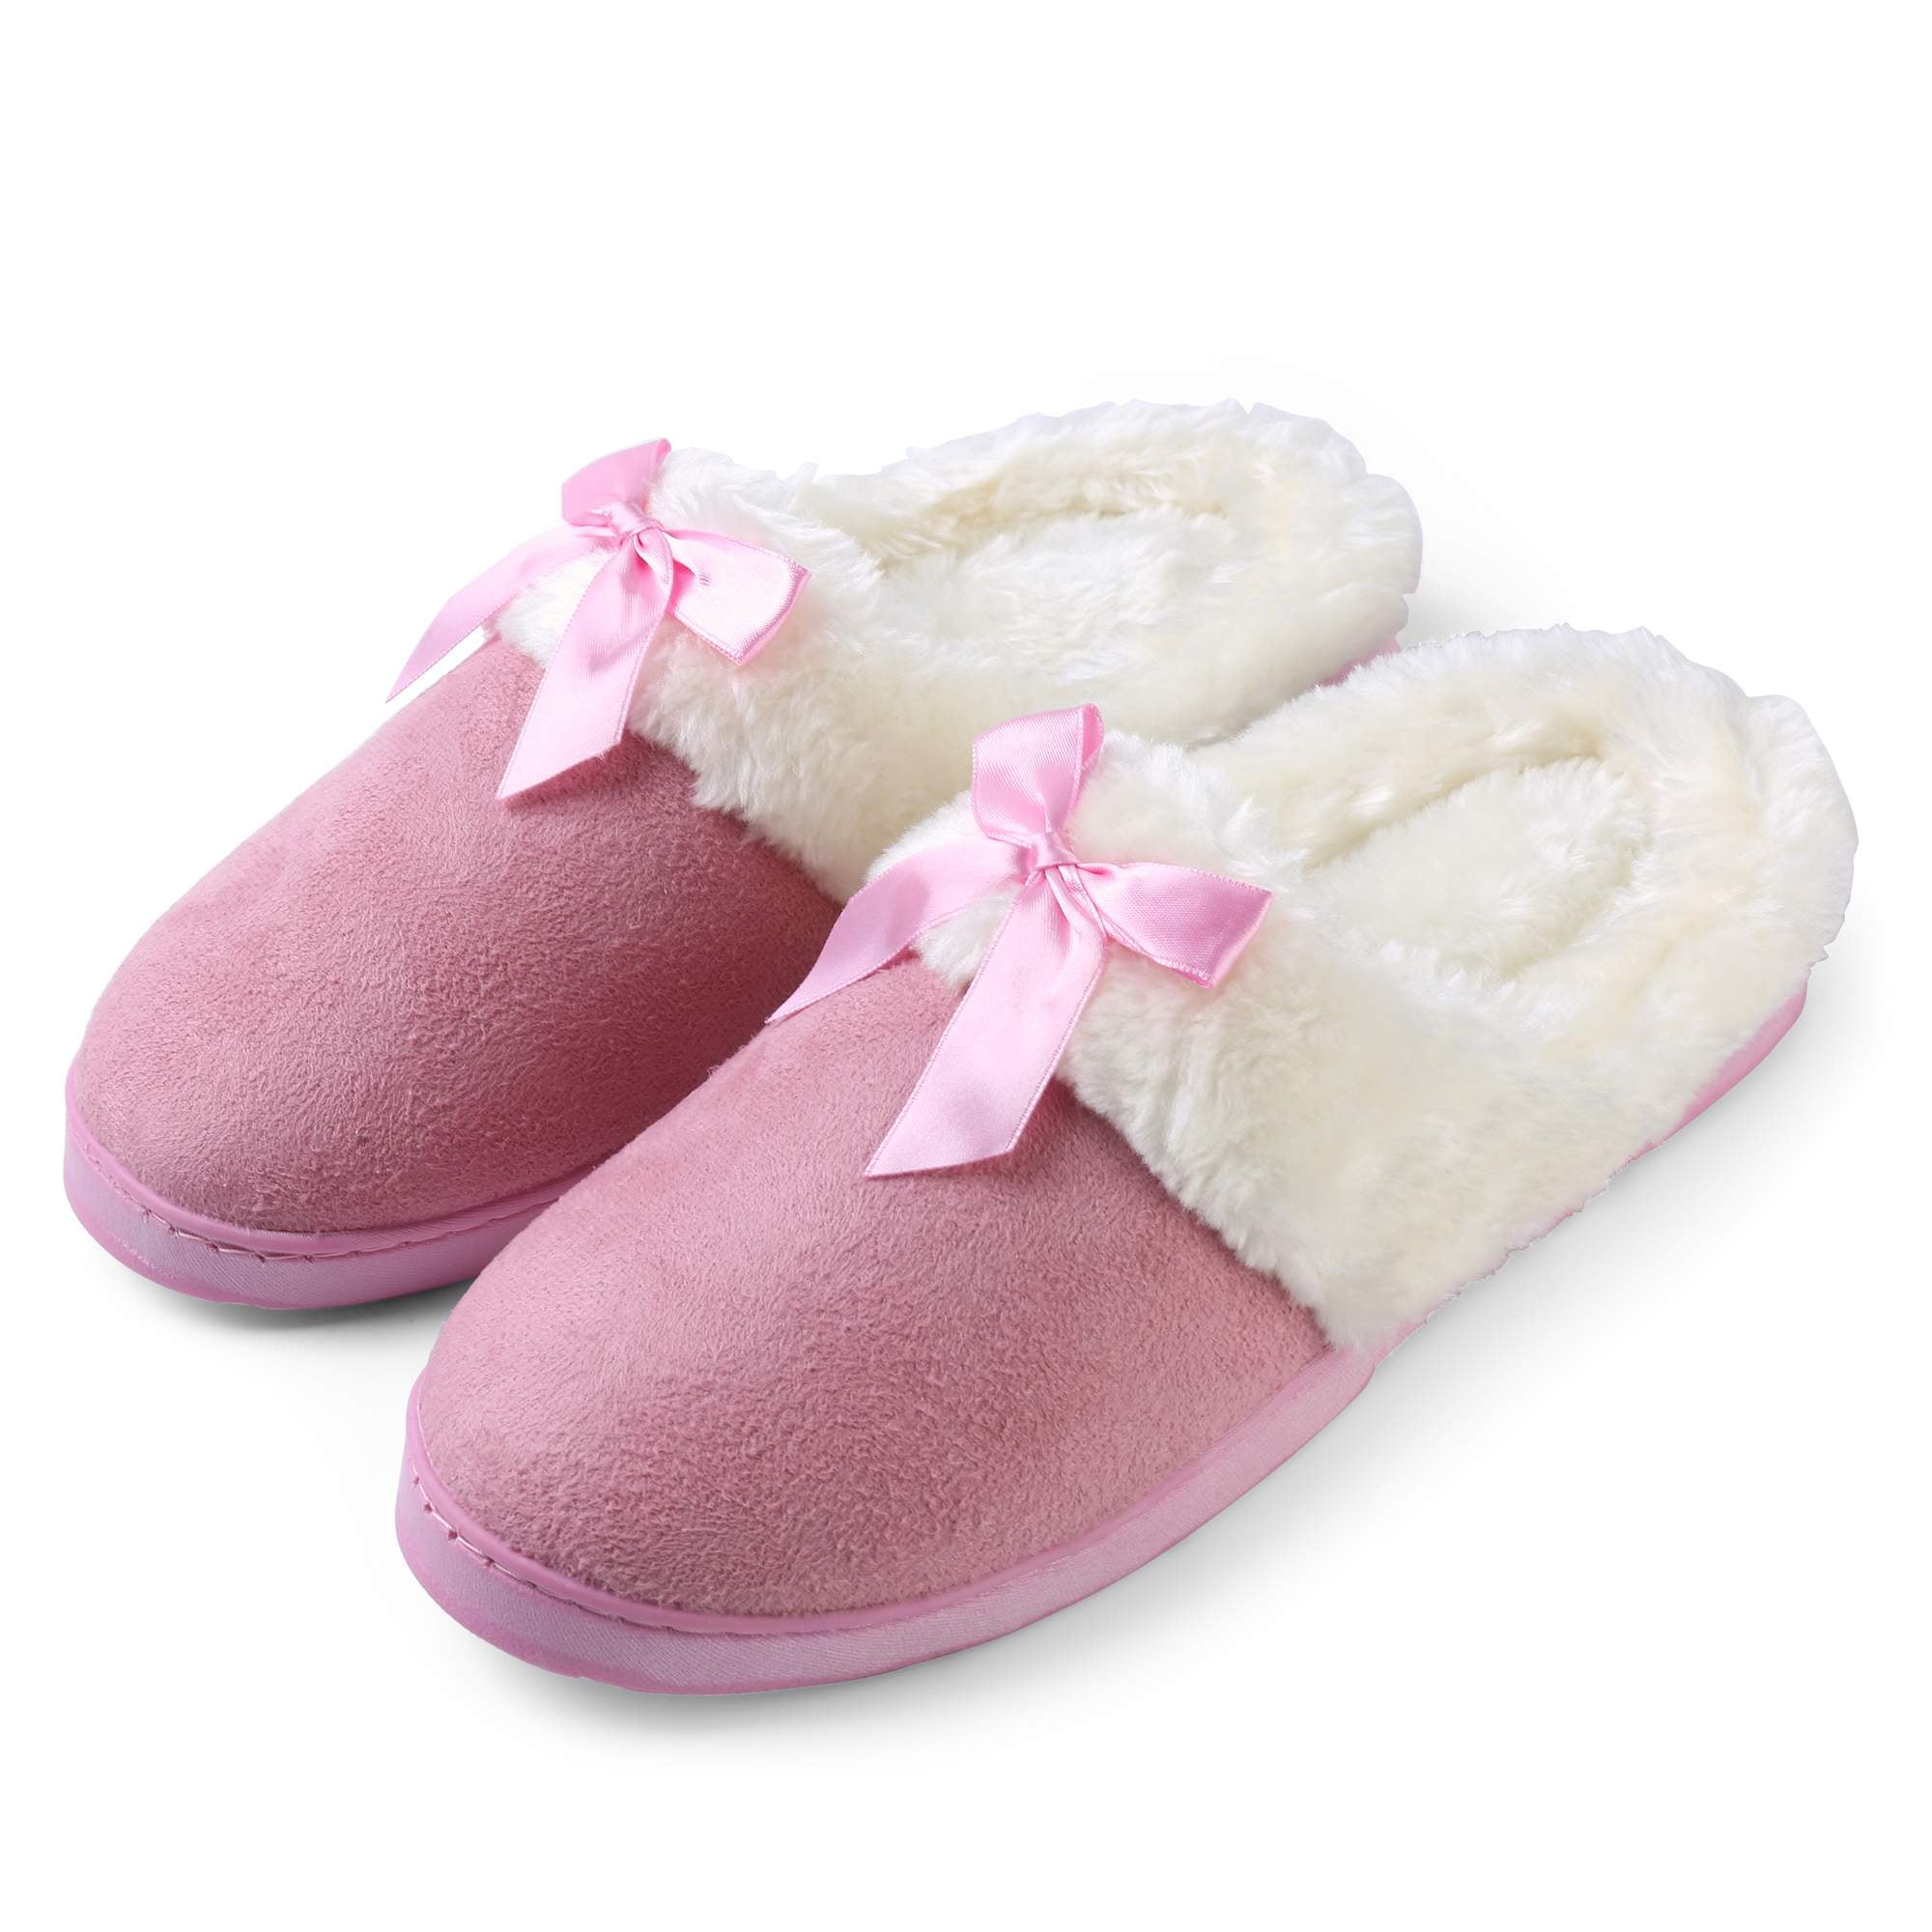 Aerusi Girl Fashion Winter Indoor Shoes House Warm Soft Slipper Size 6-9 Pink